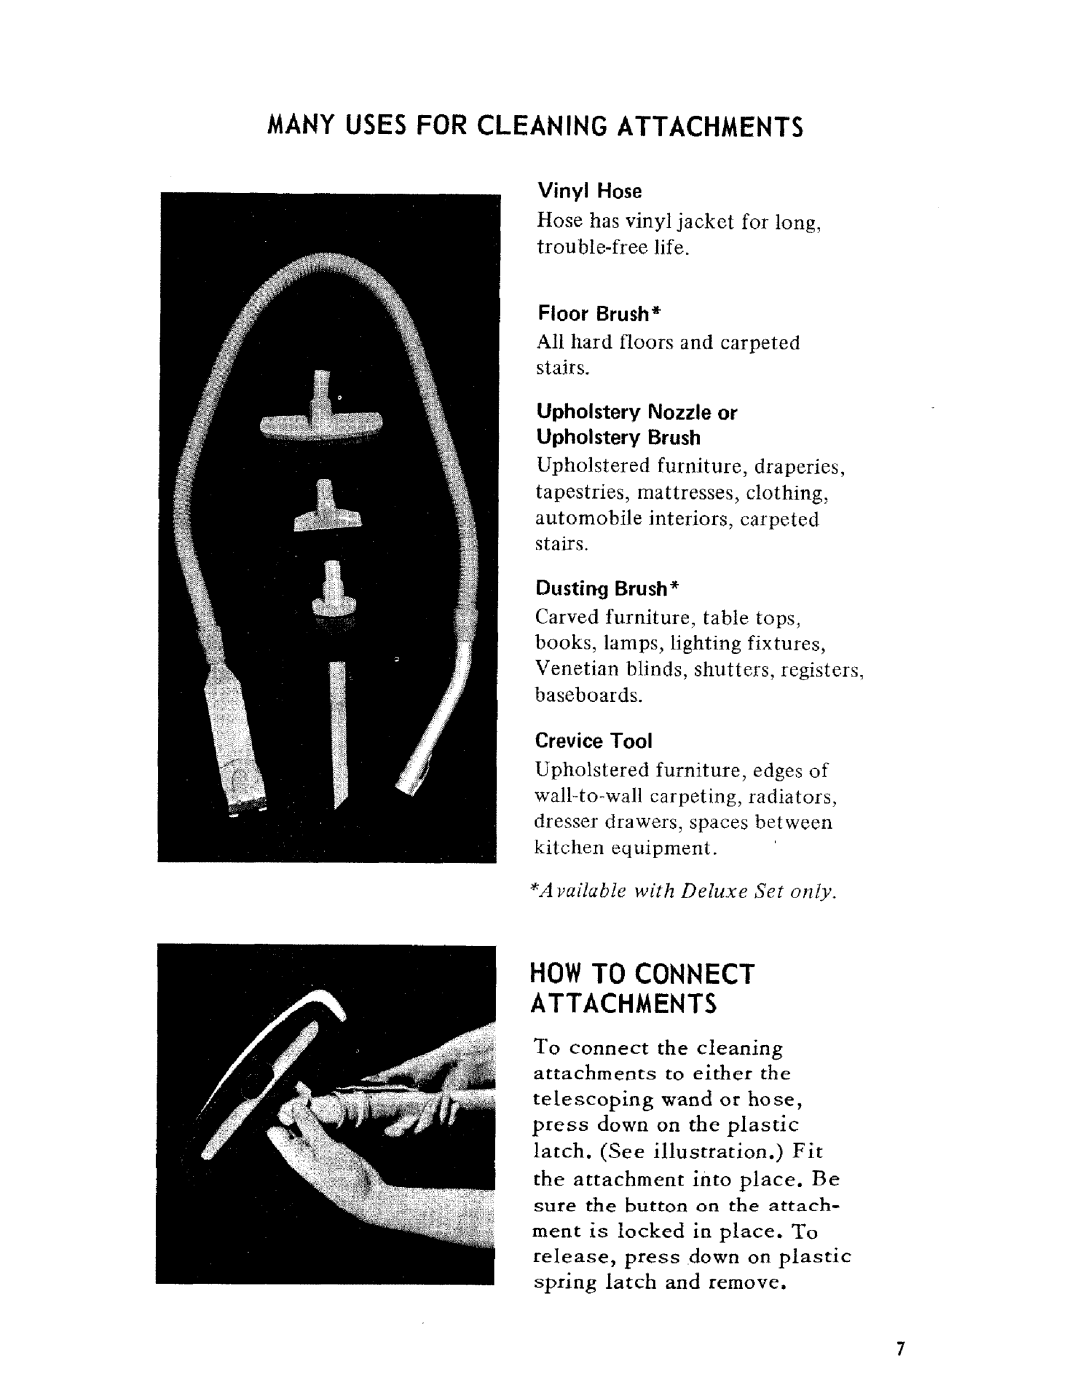 Hoover U4001 owner manual Many Uses For Cleaning Attachments, How To Connect Attachments, Floor Brush, Crevice Tool 